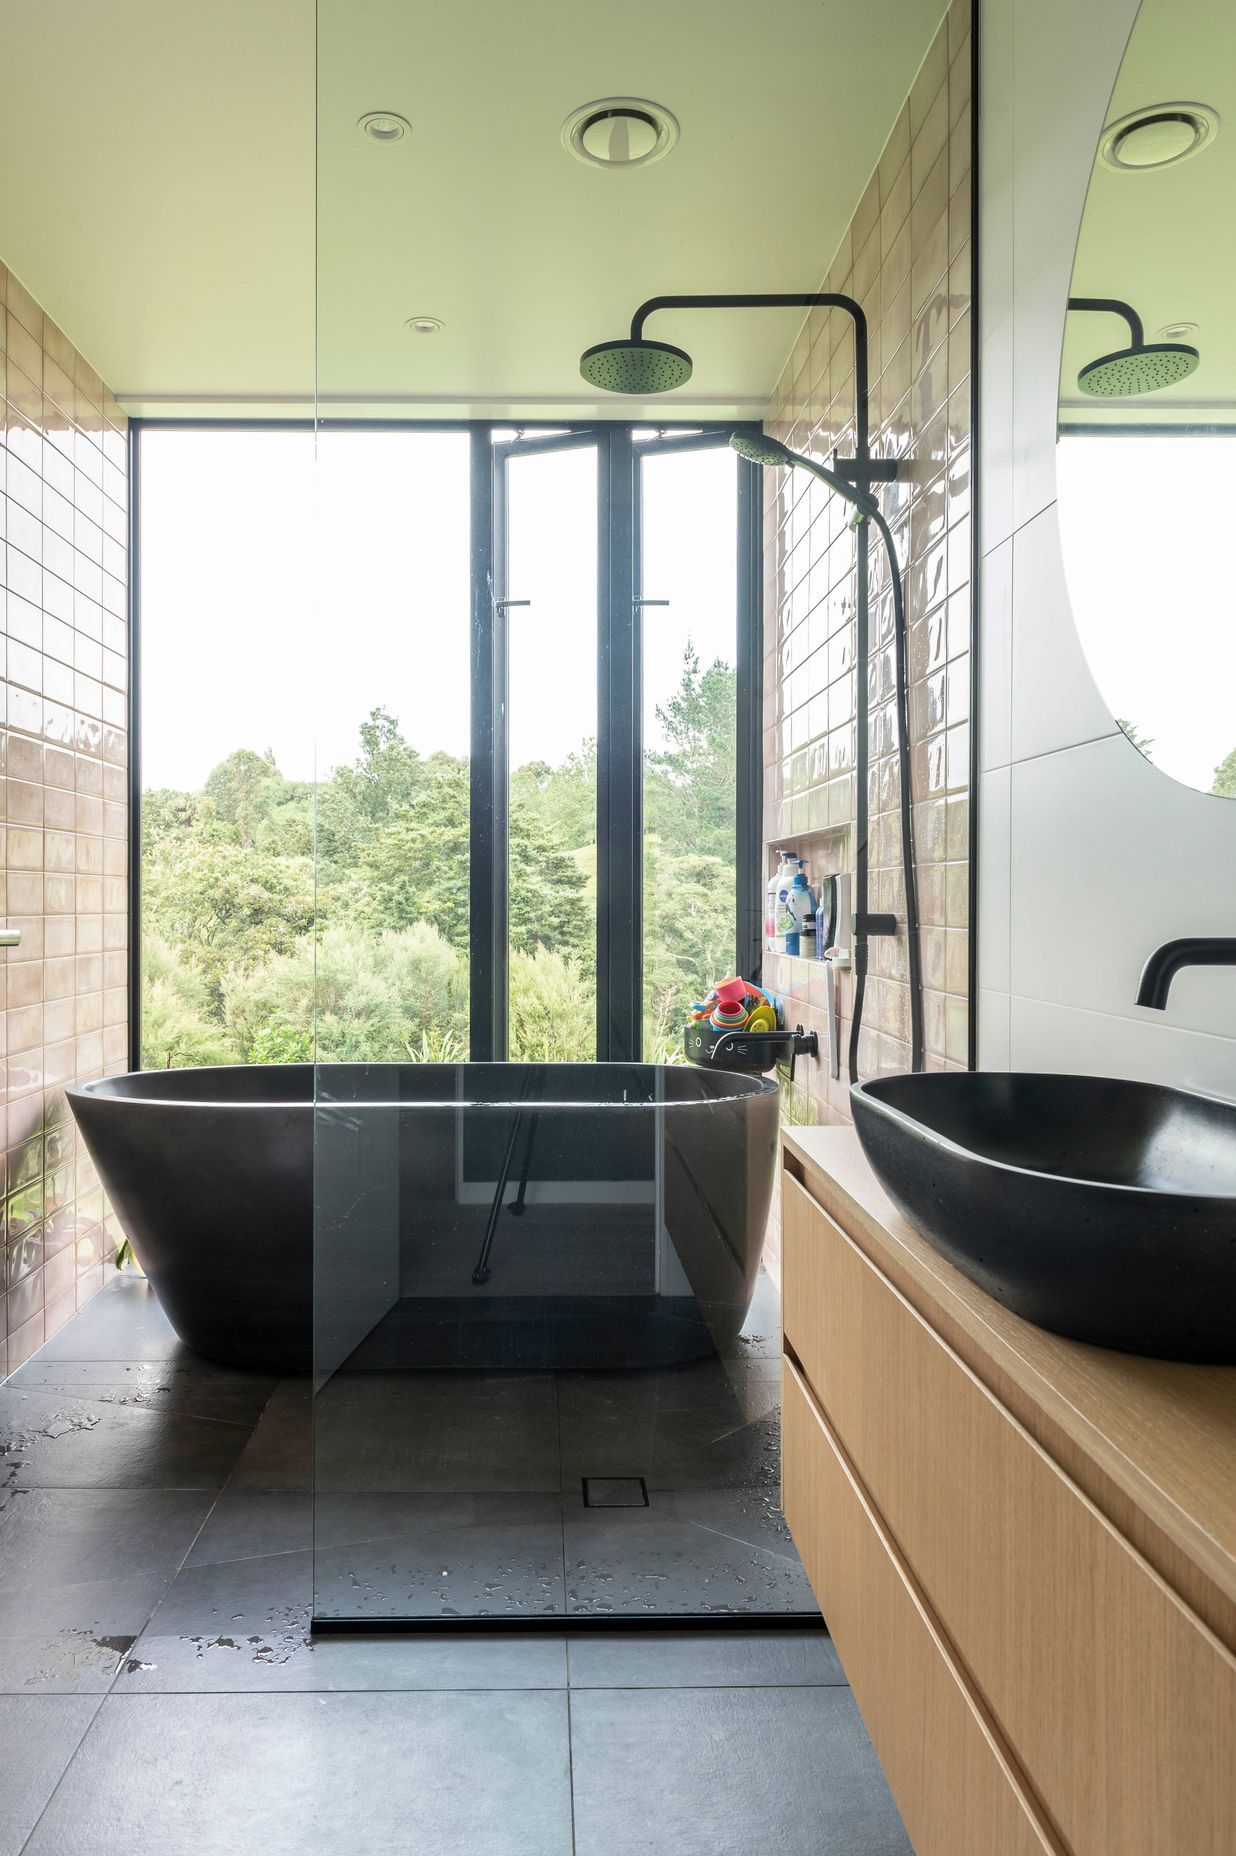 In the master suite, a standalone tub is the perfect private spot for respite and a view of the bush.